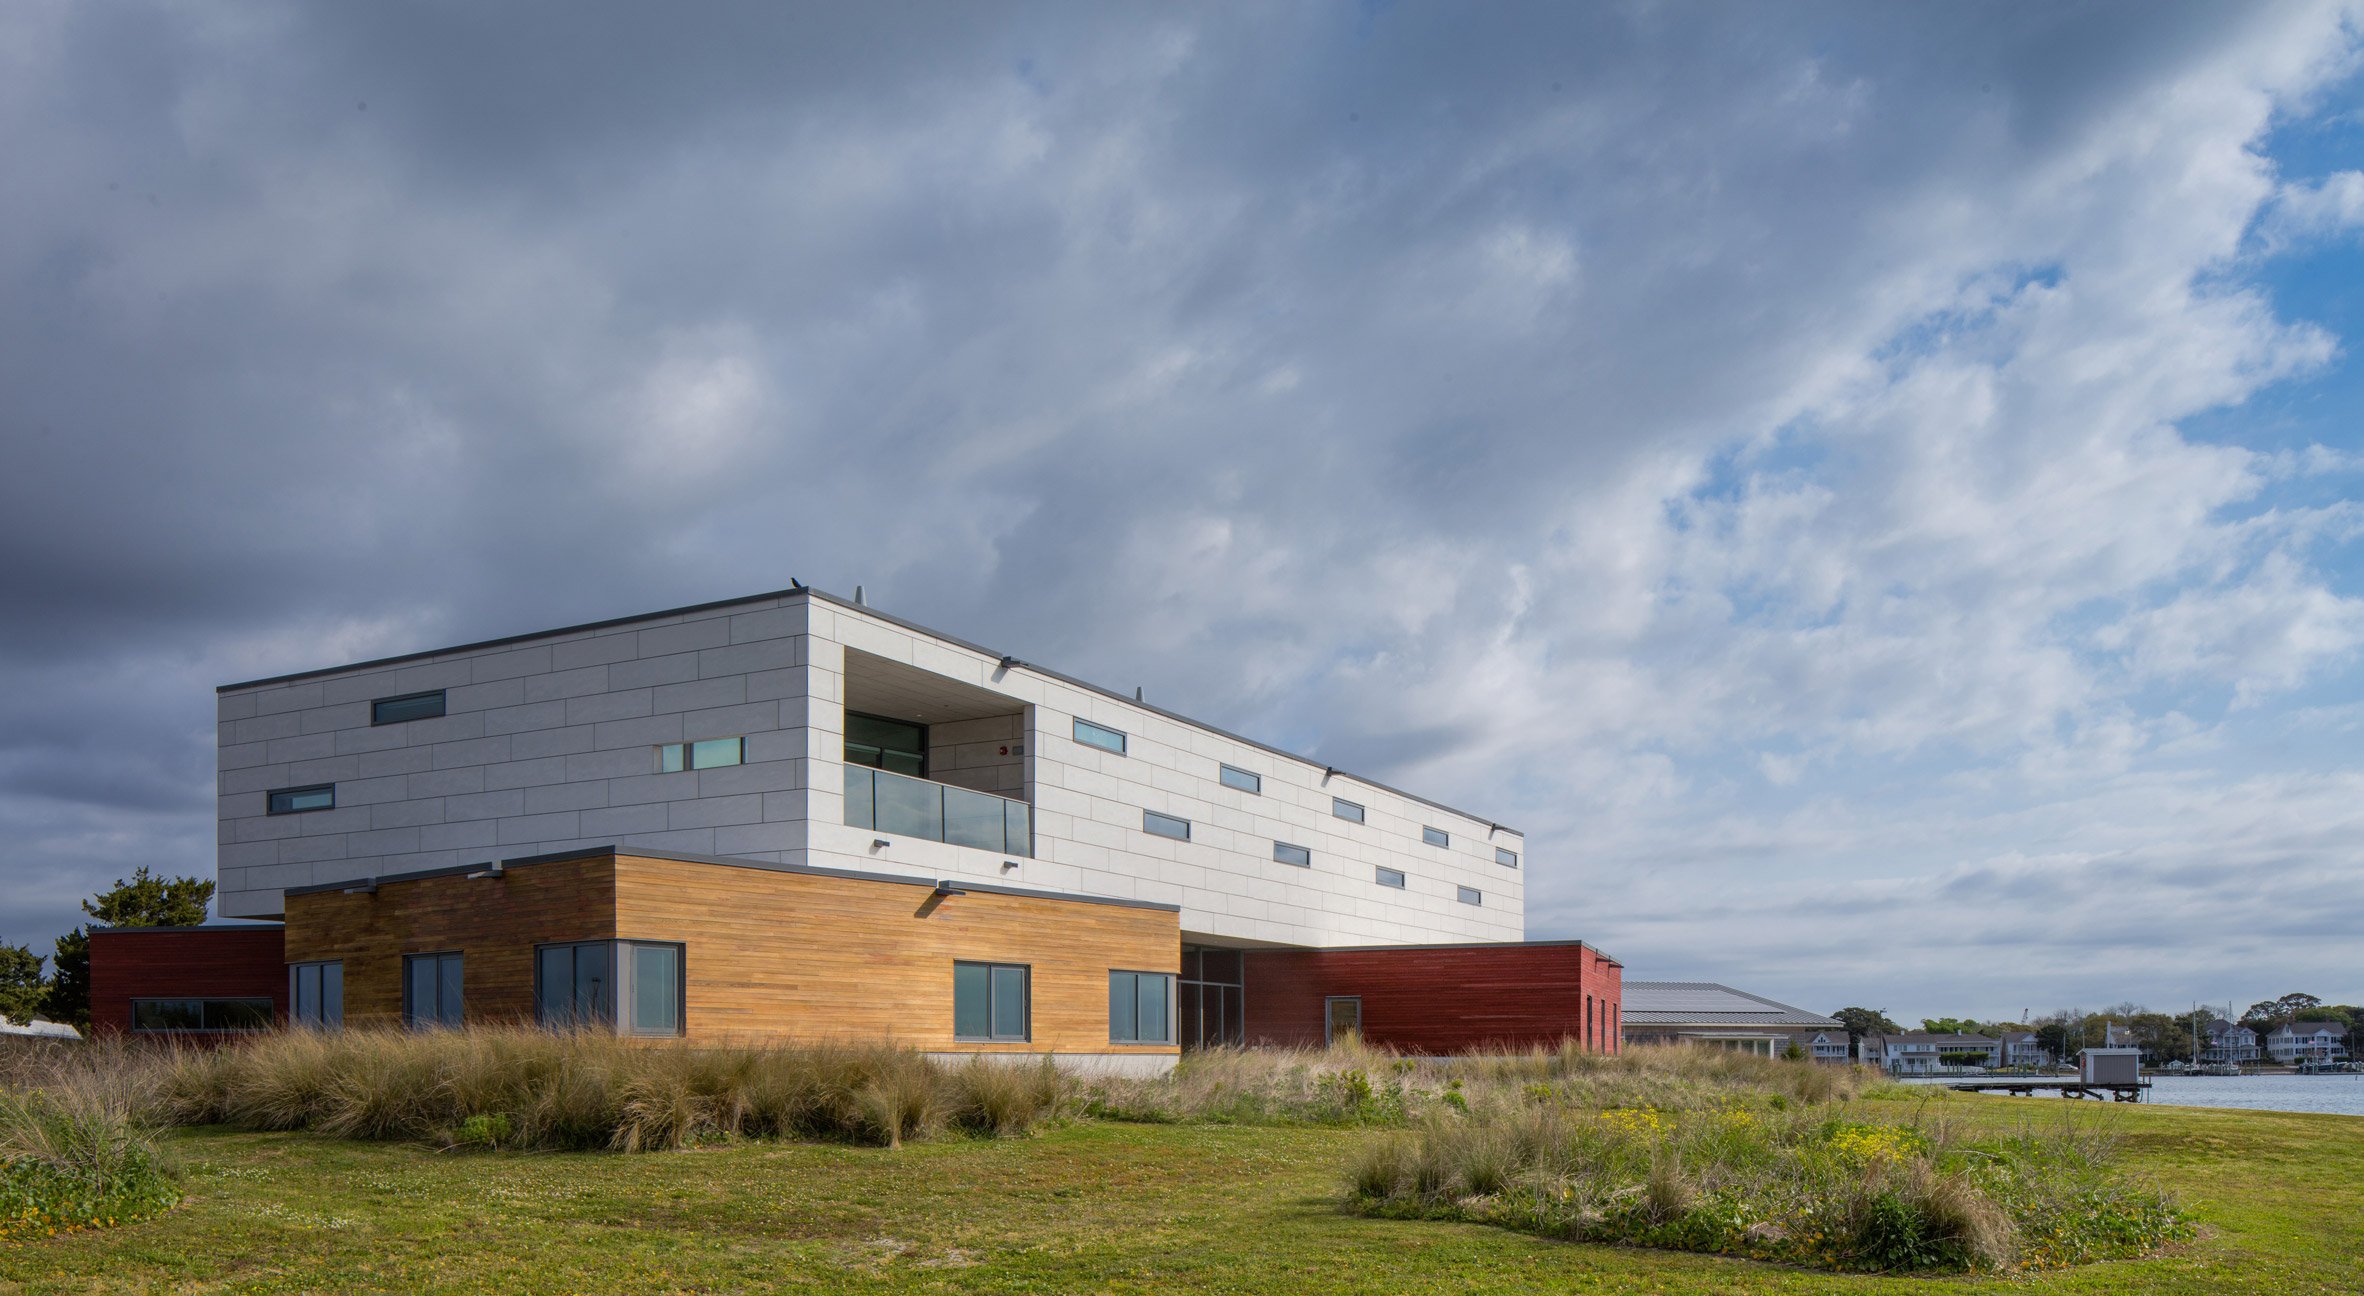 Gluck+ designs coastal laboratory in North Carolina to withstand extreme weather